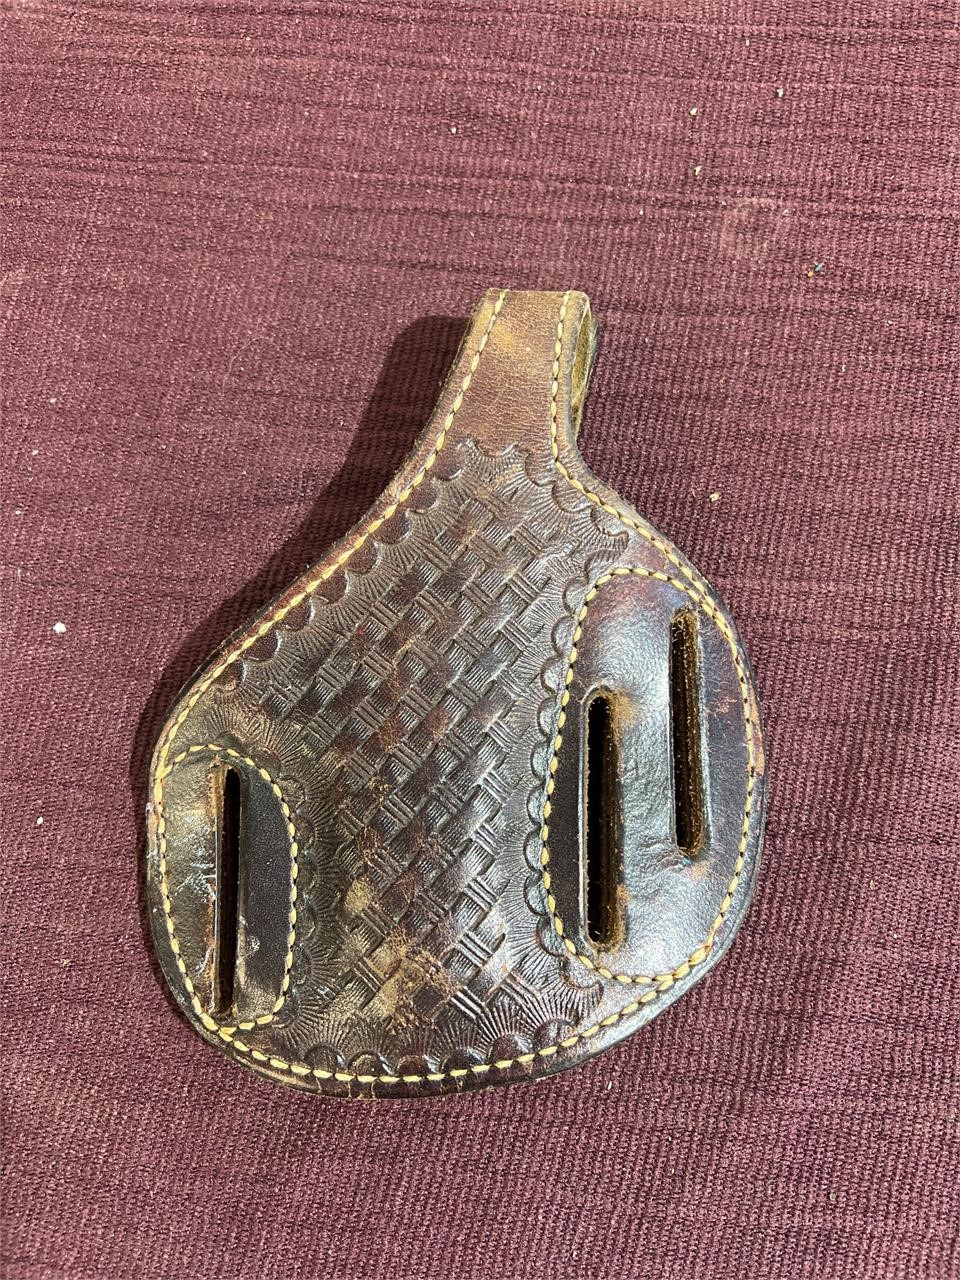 Roy’s leather holster